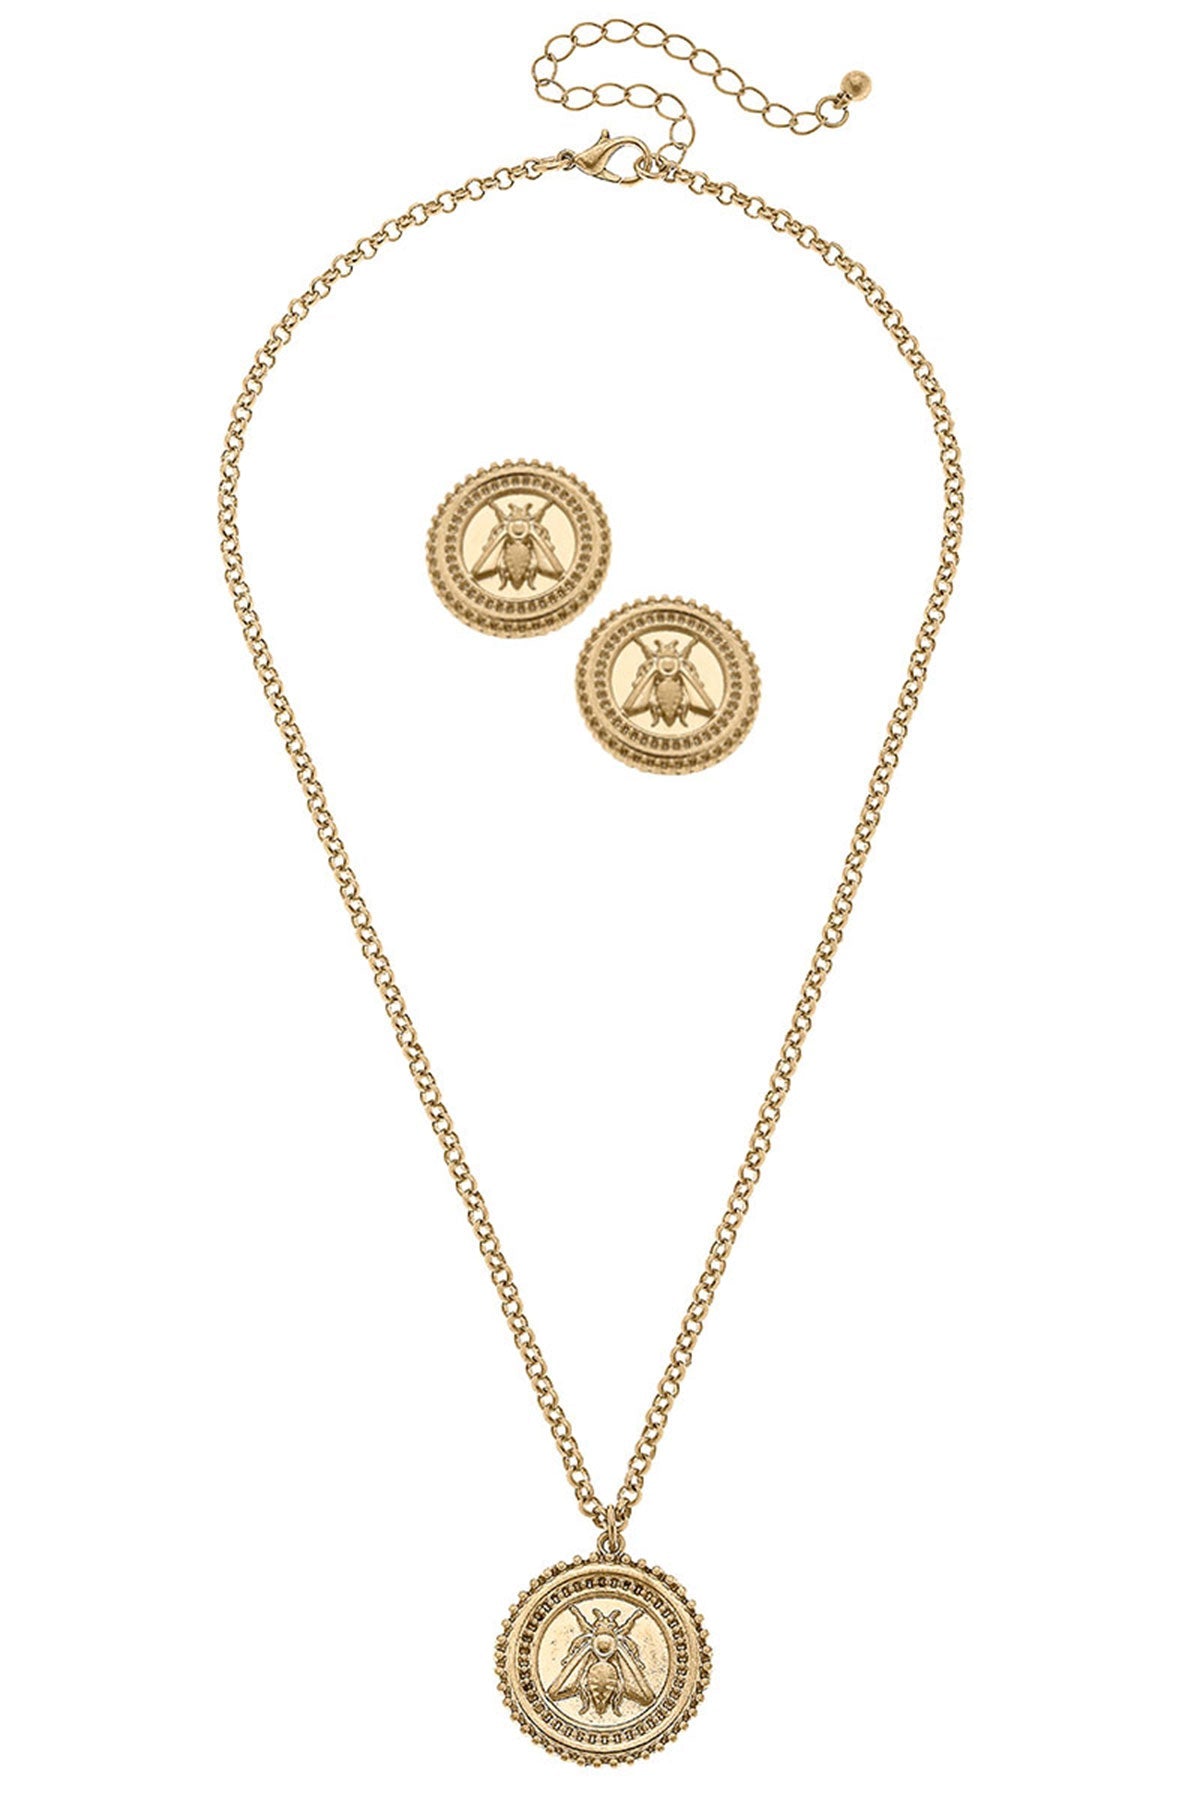 Lizette Bee Medallion Earring and Necklace Set in Worn Gold